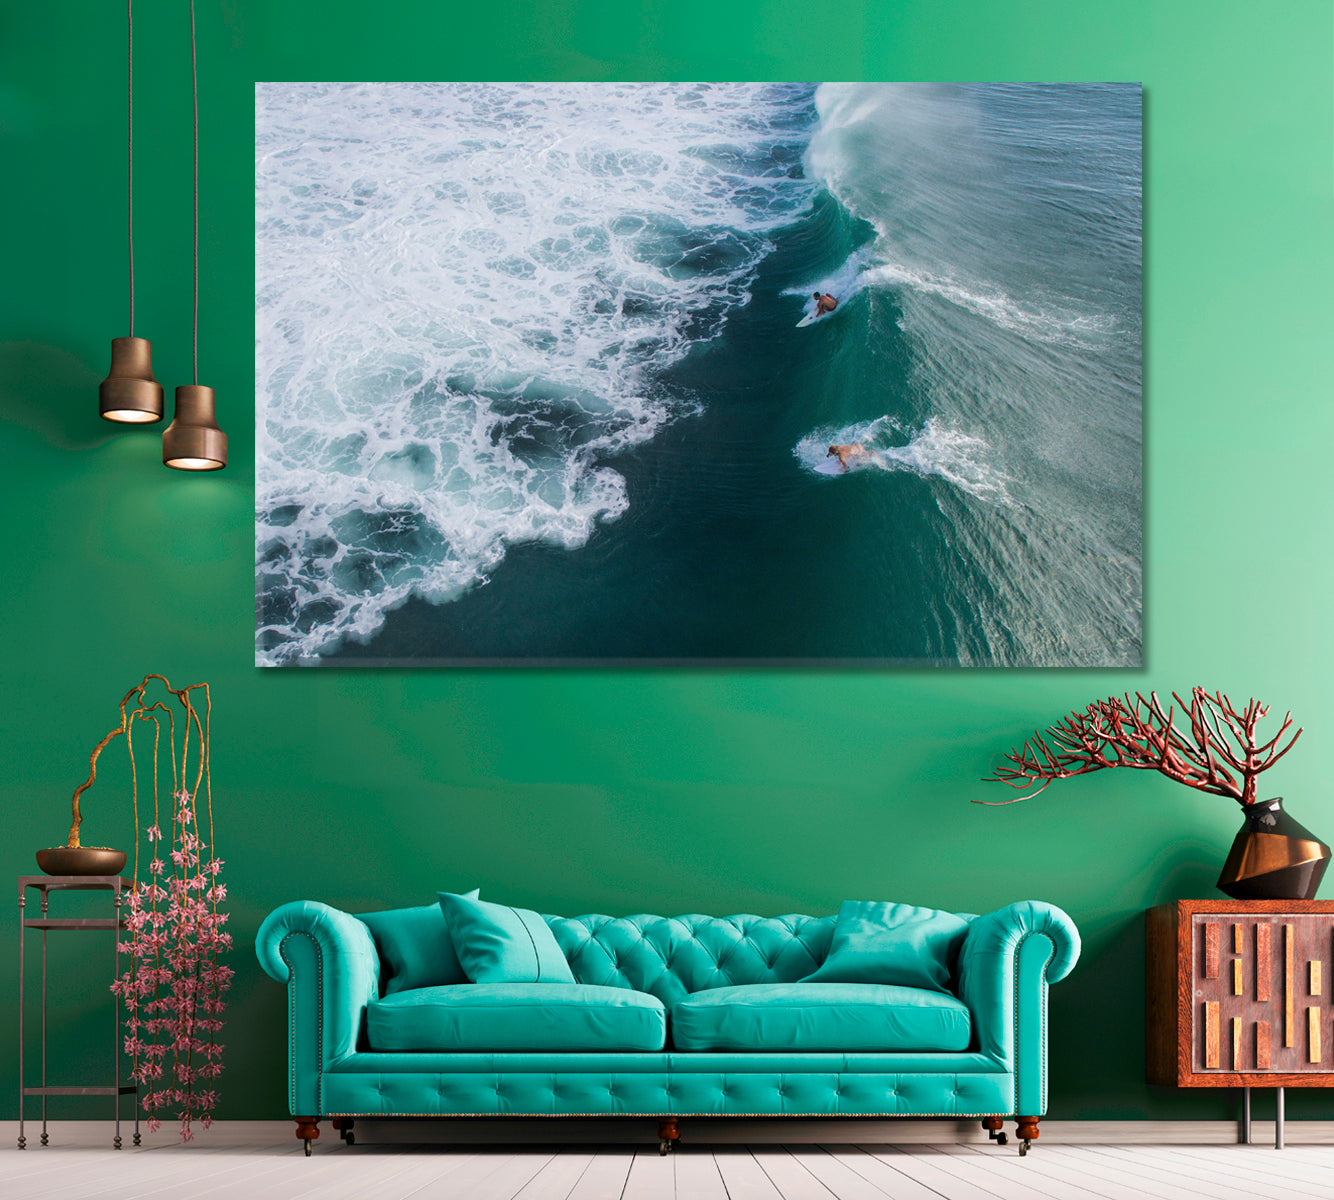 Surfers on Wave Bali Indonesia Canvas Print ArtLexy 1 Panel 24"x16" inches 